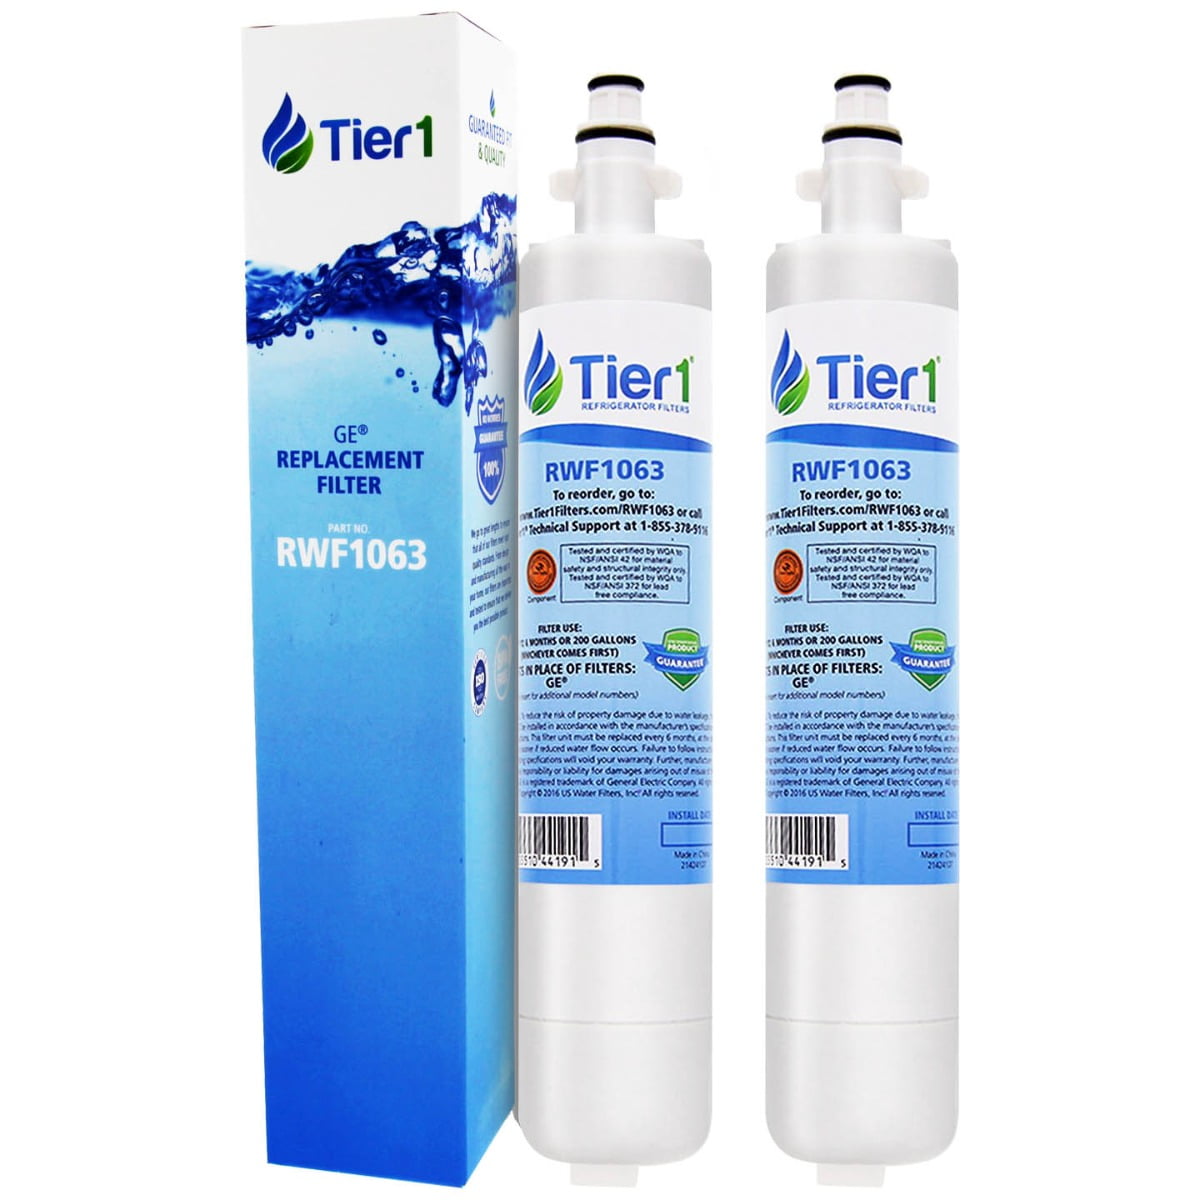 Tier1 RWF1063 Refrigerator Water Filter for sale online 